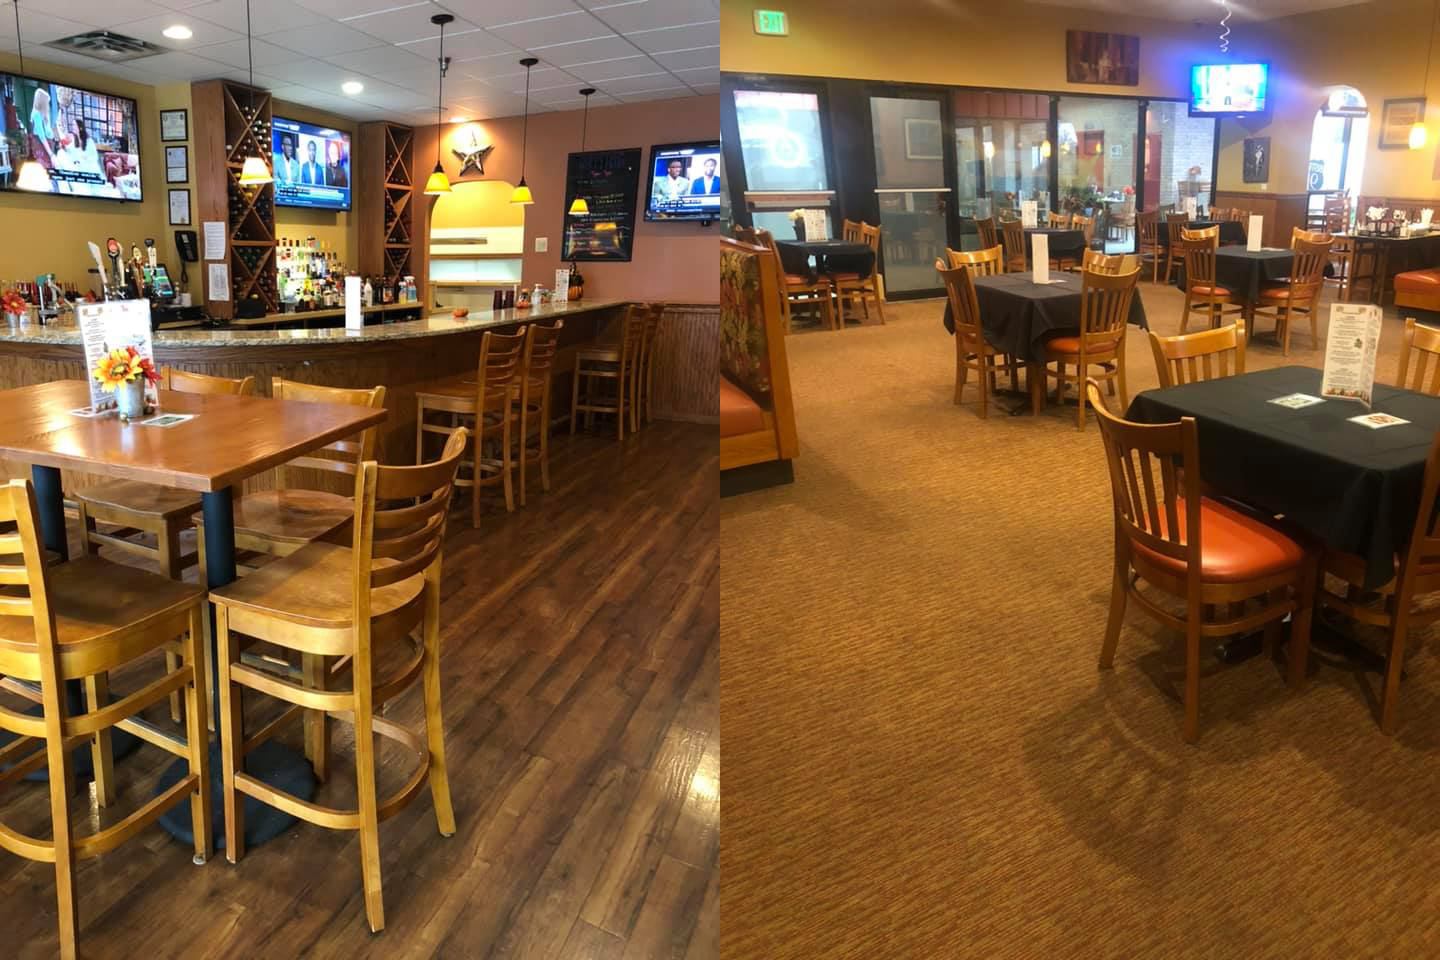 Our redesigned indoor dining area is safe and spacious.